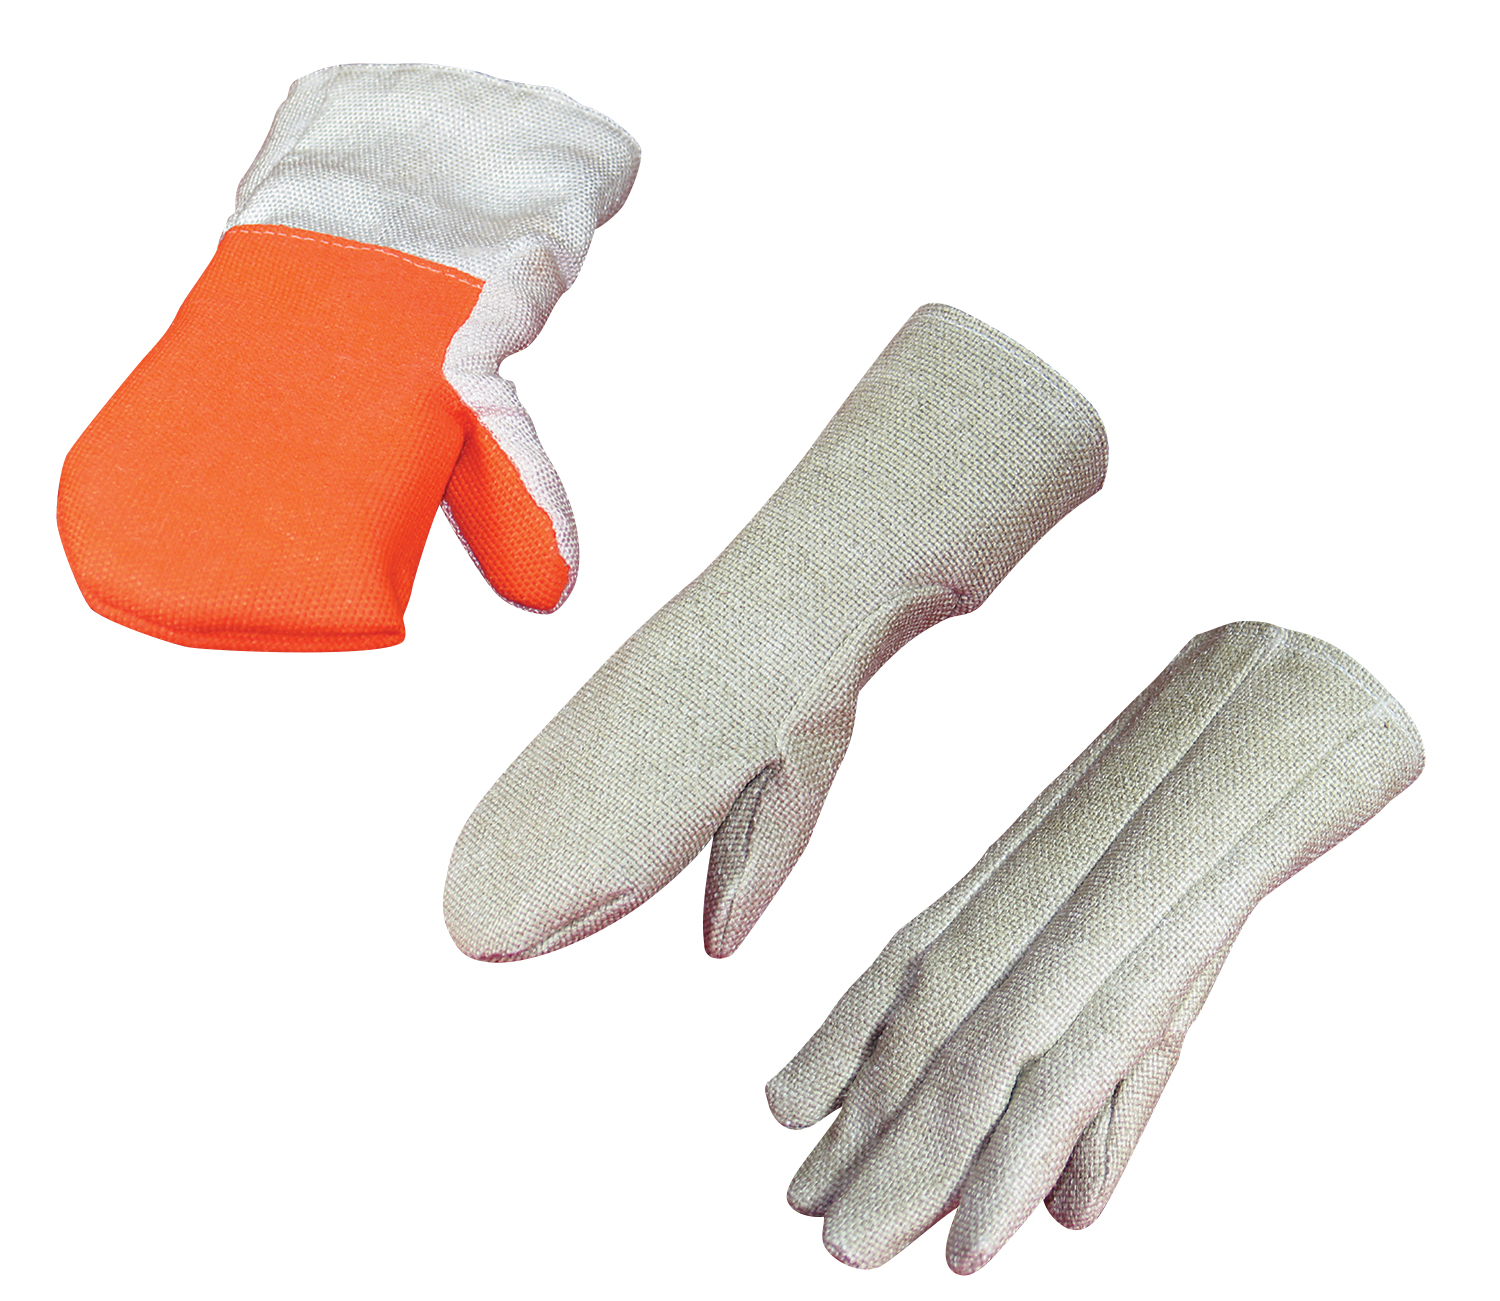 3R33 3R37 3R38 Industries3R High temperature products Gloves Hands